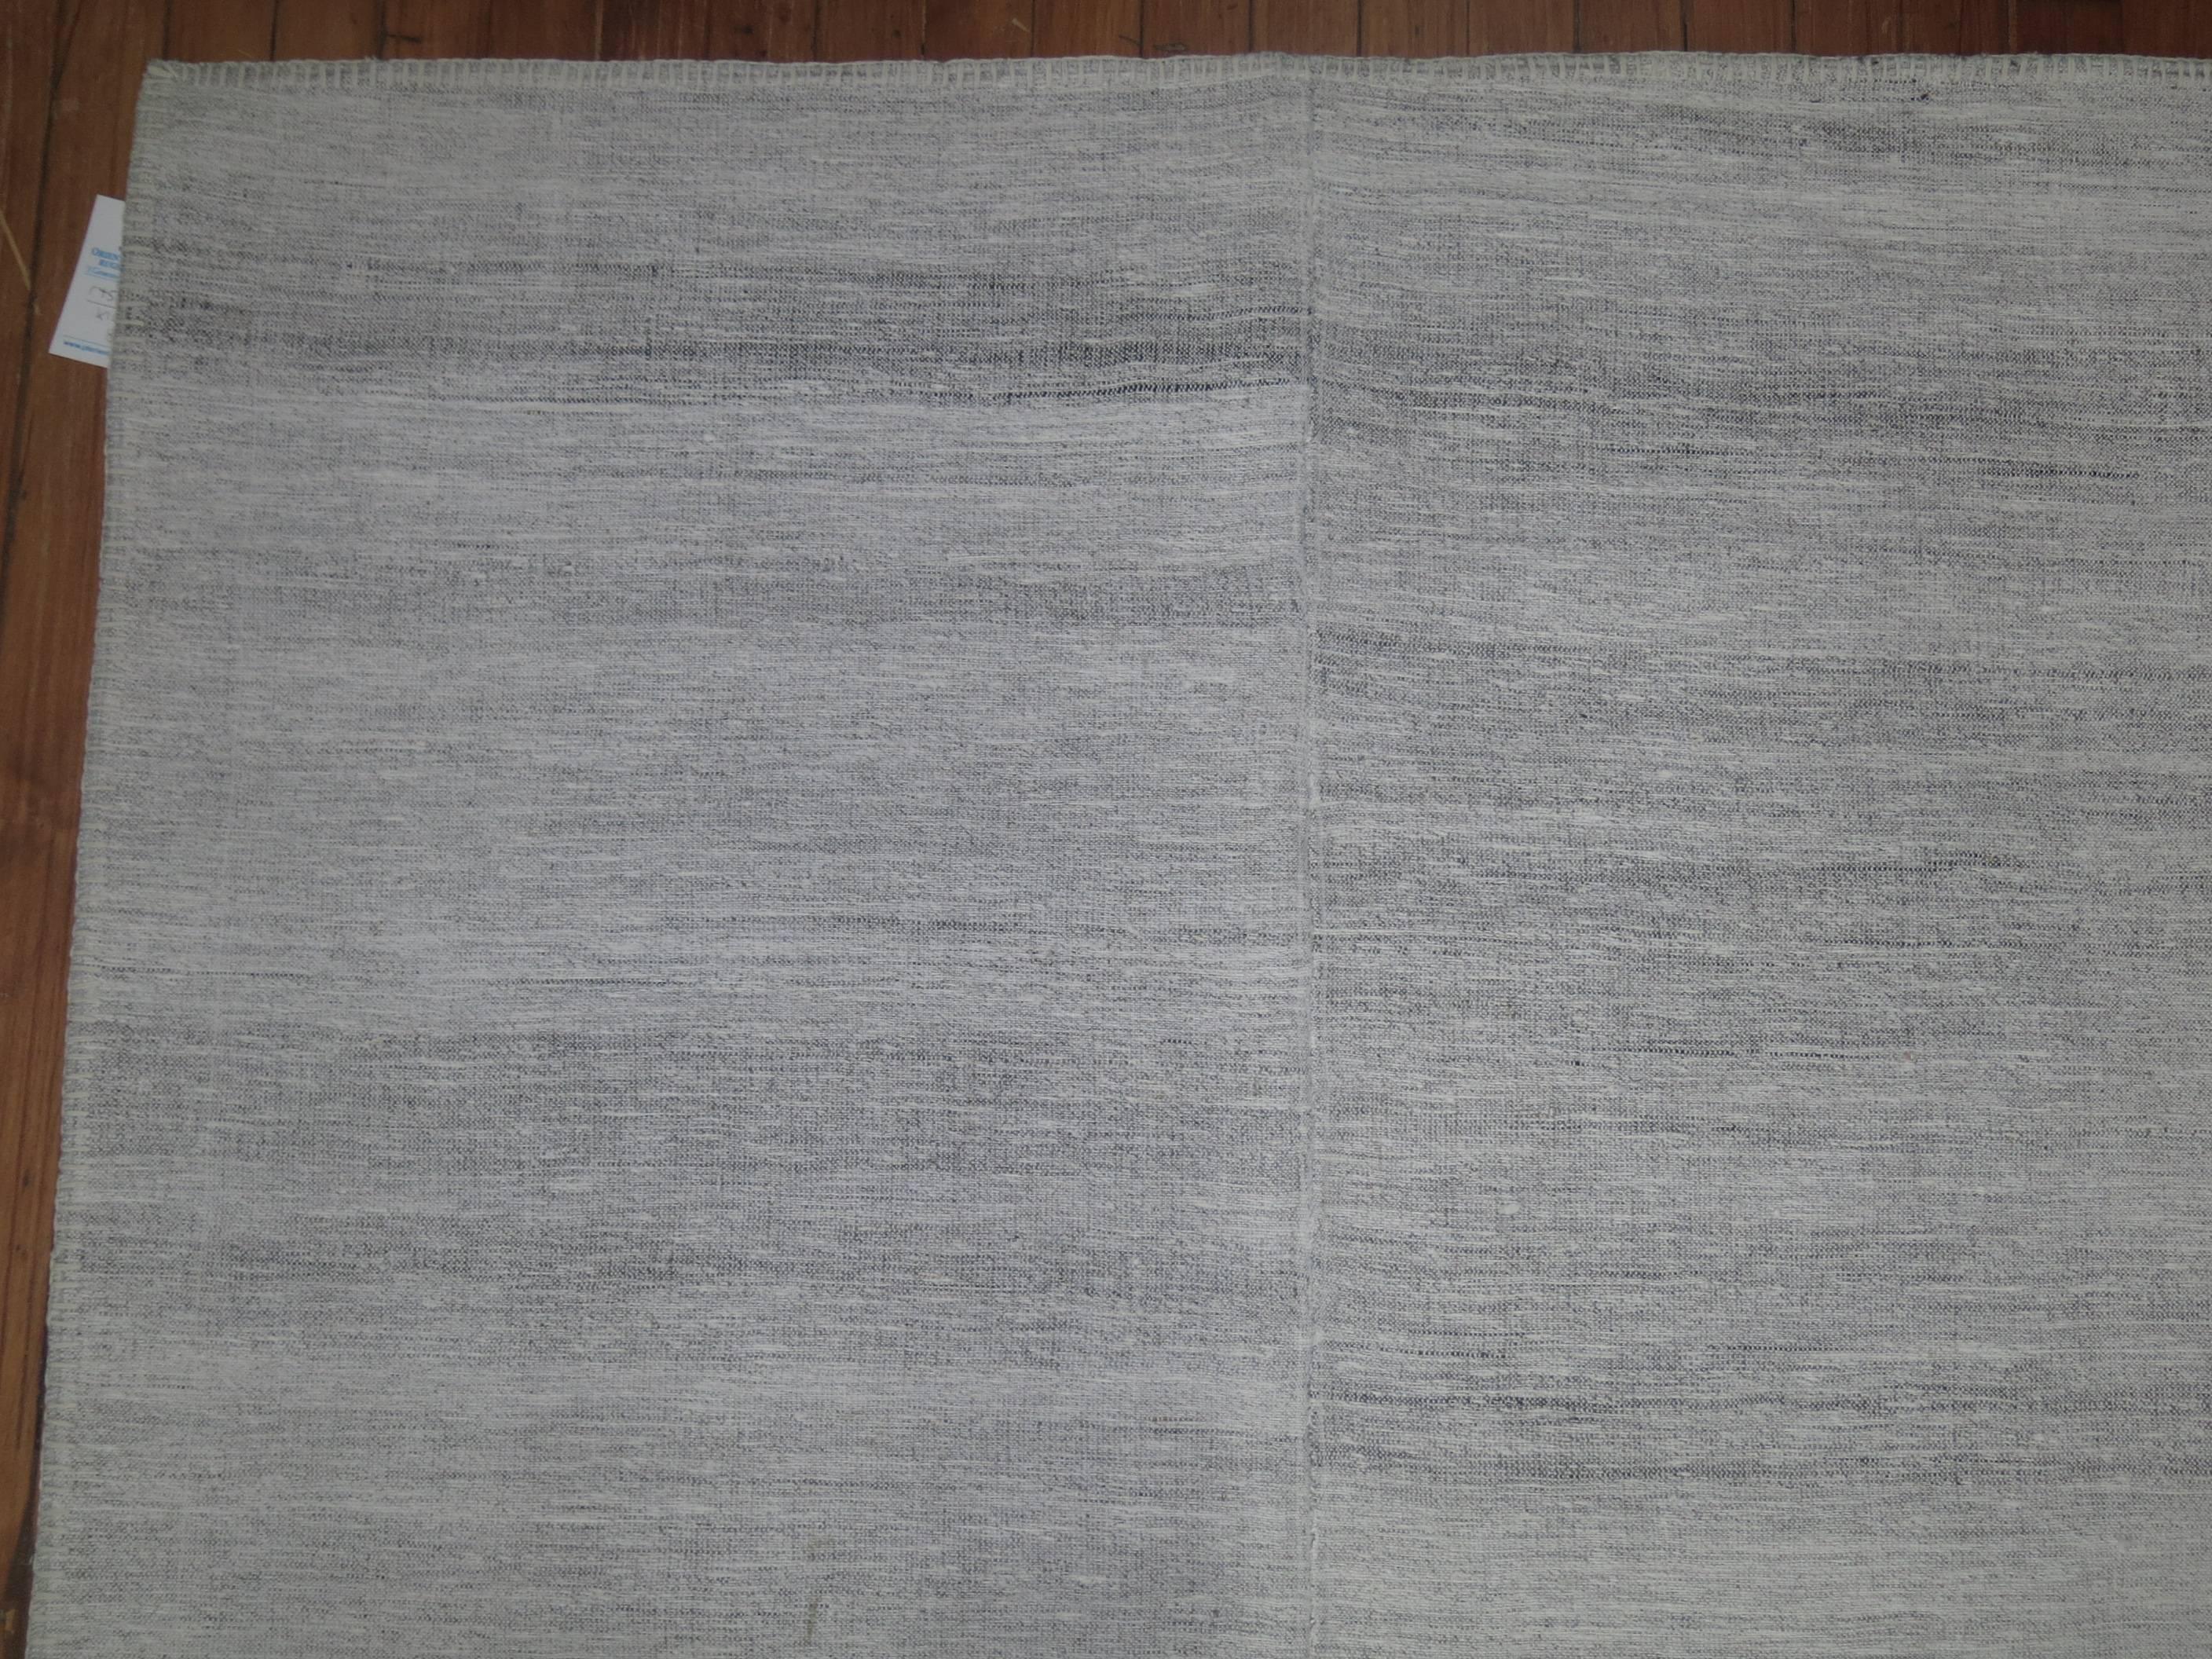 A one of a kind Room size Modern Turkish Kilim in clear white and grays

8'2'' x 12'4''